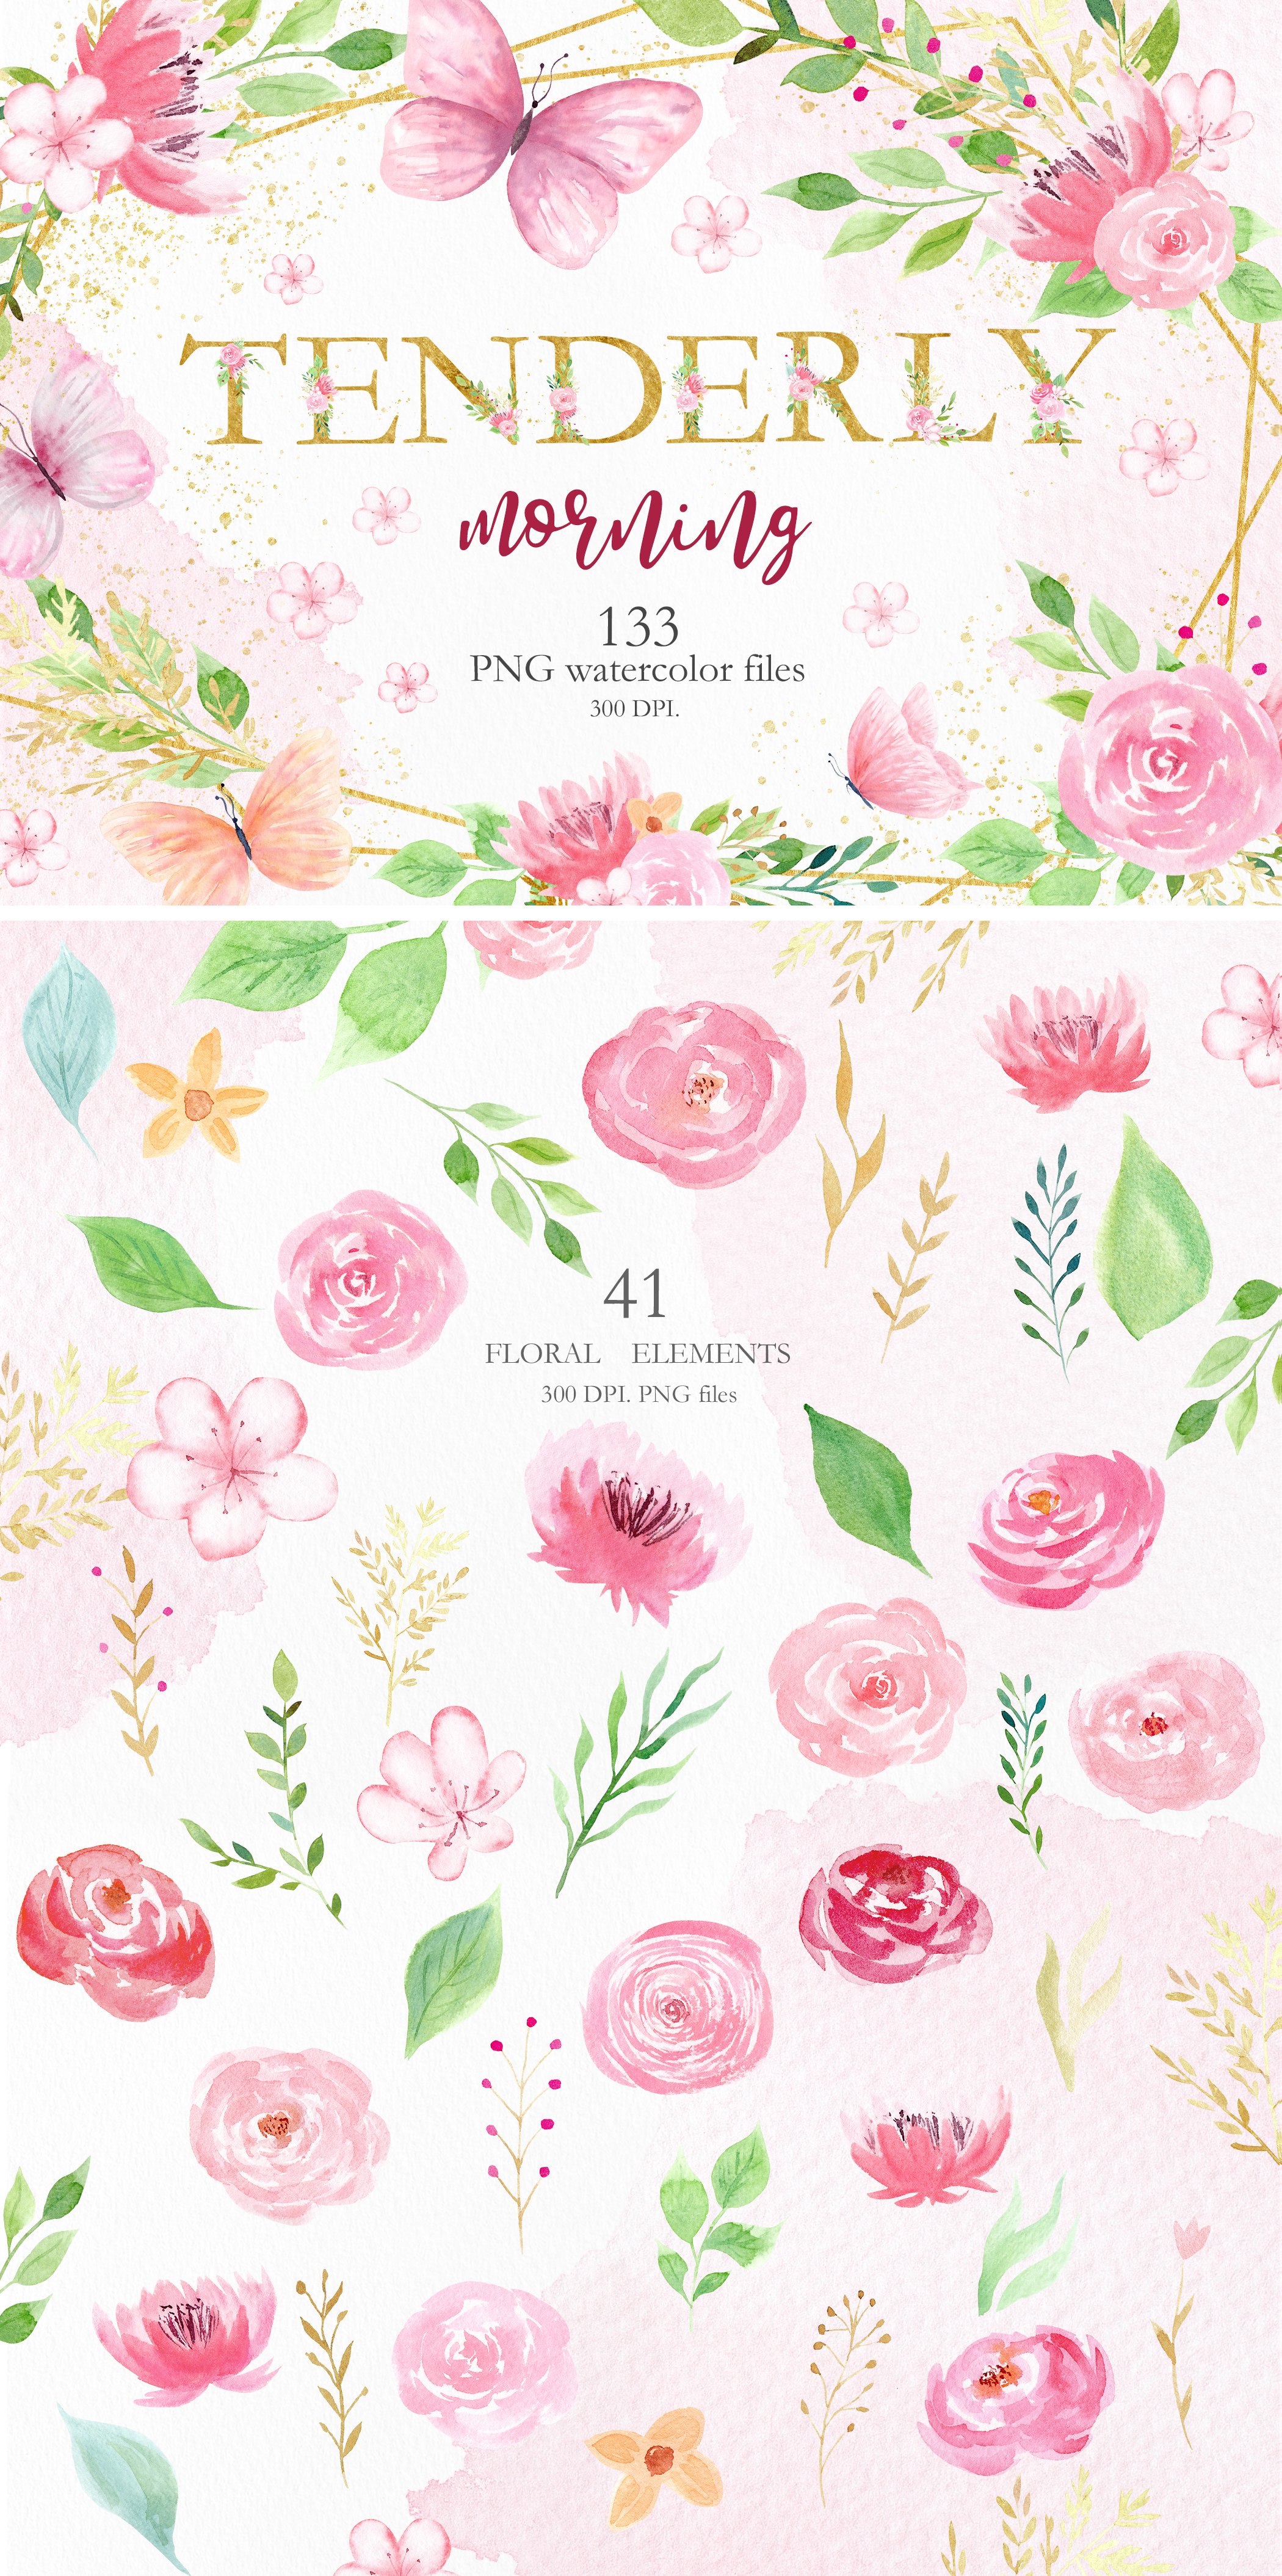 Watercolor Floral and Butterfly Set cover image.